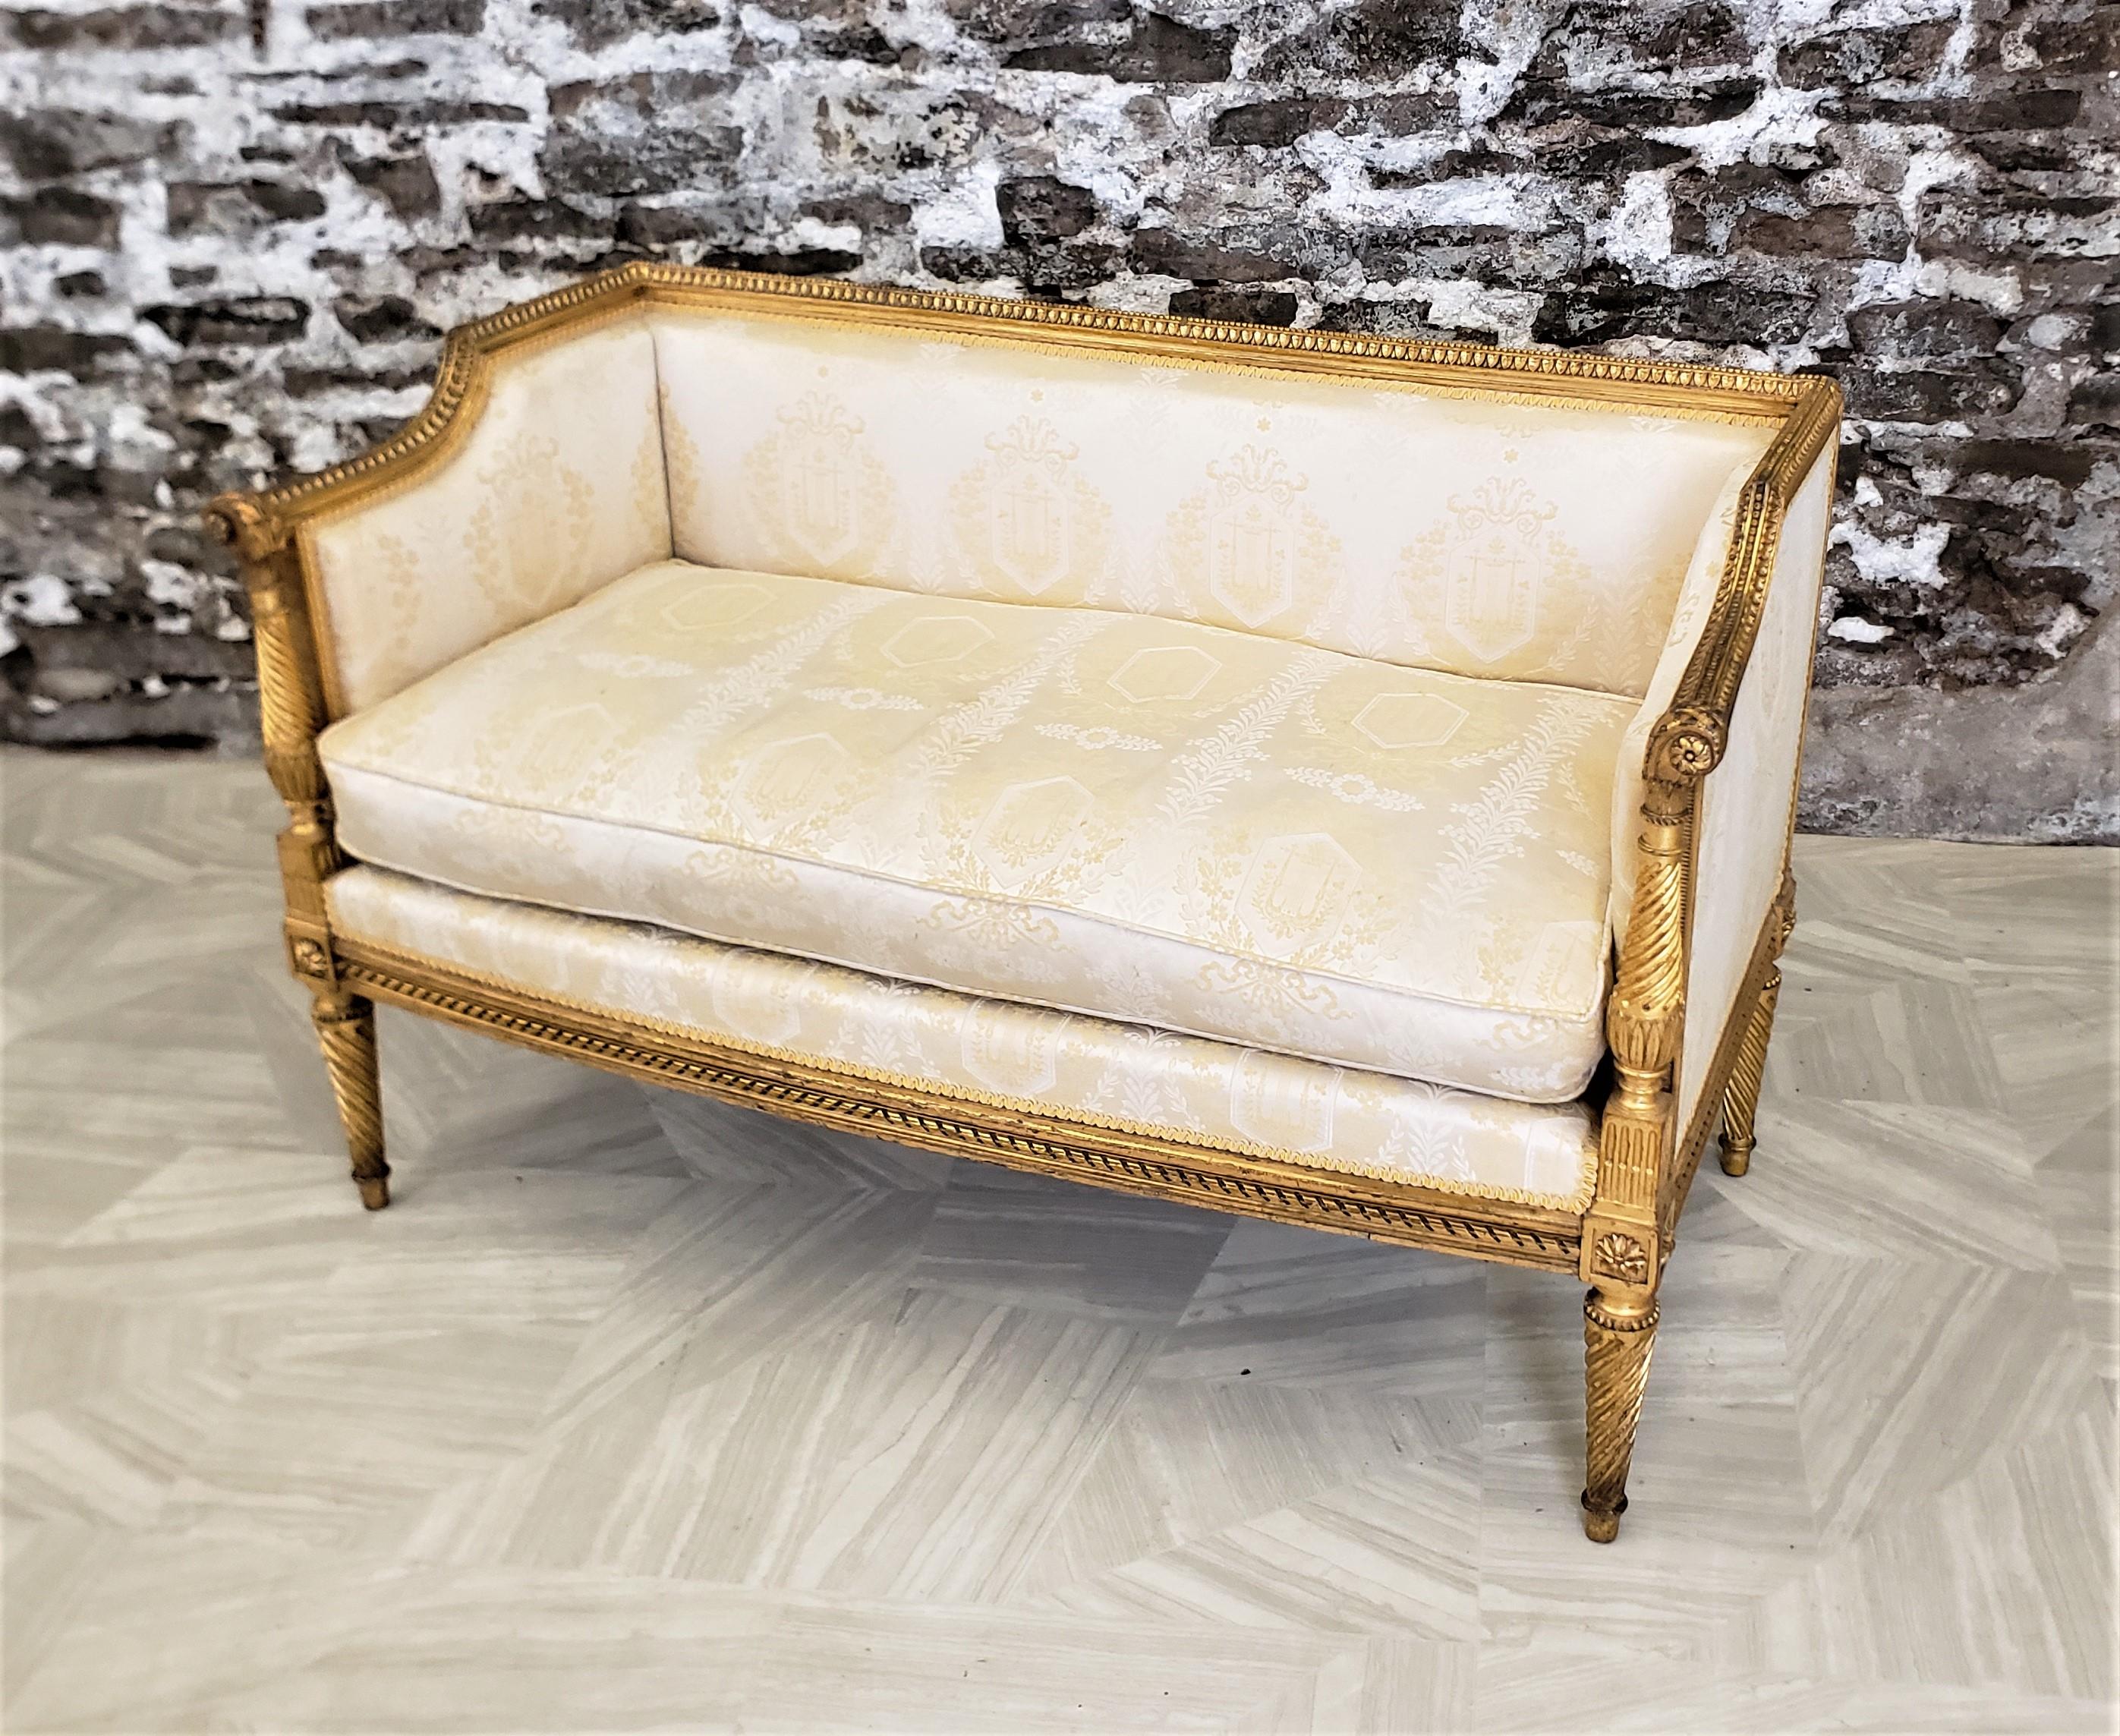 Fabric Antique French Directoire Styled Settee with Hand-Carved Giltwood Accents